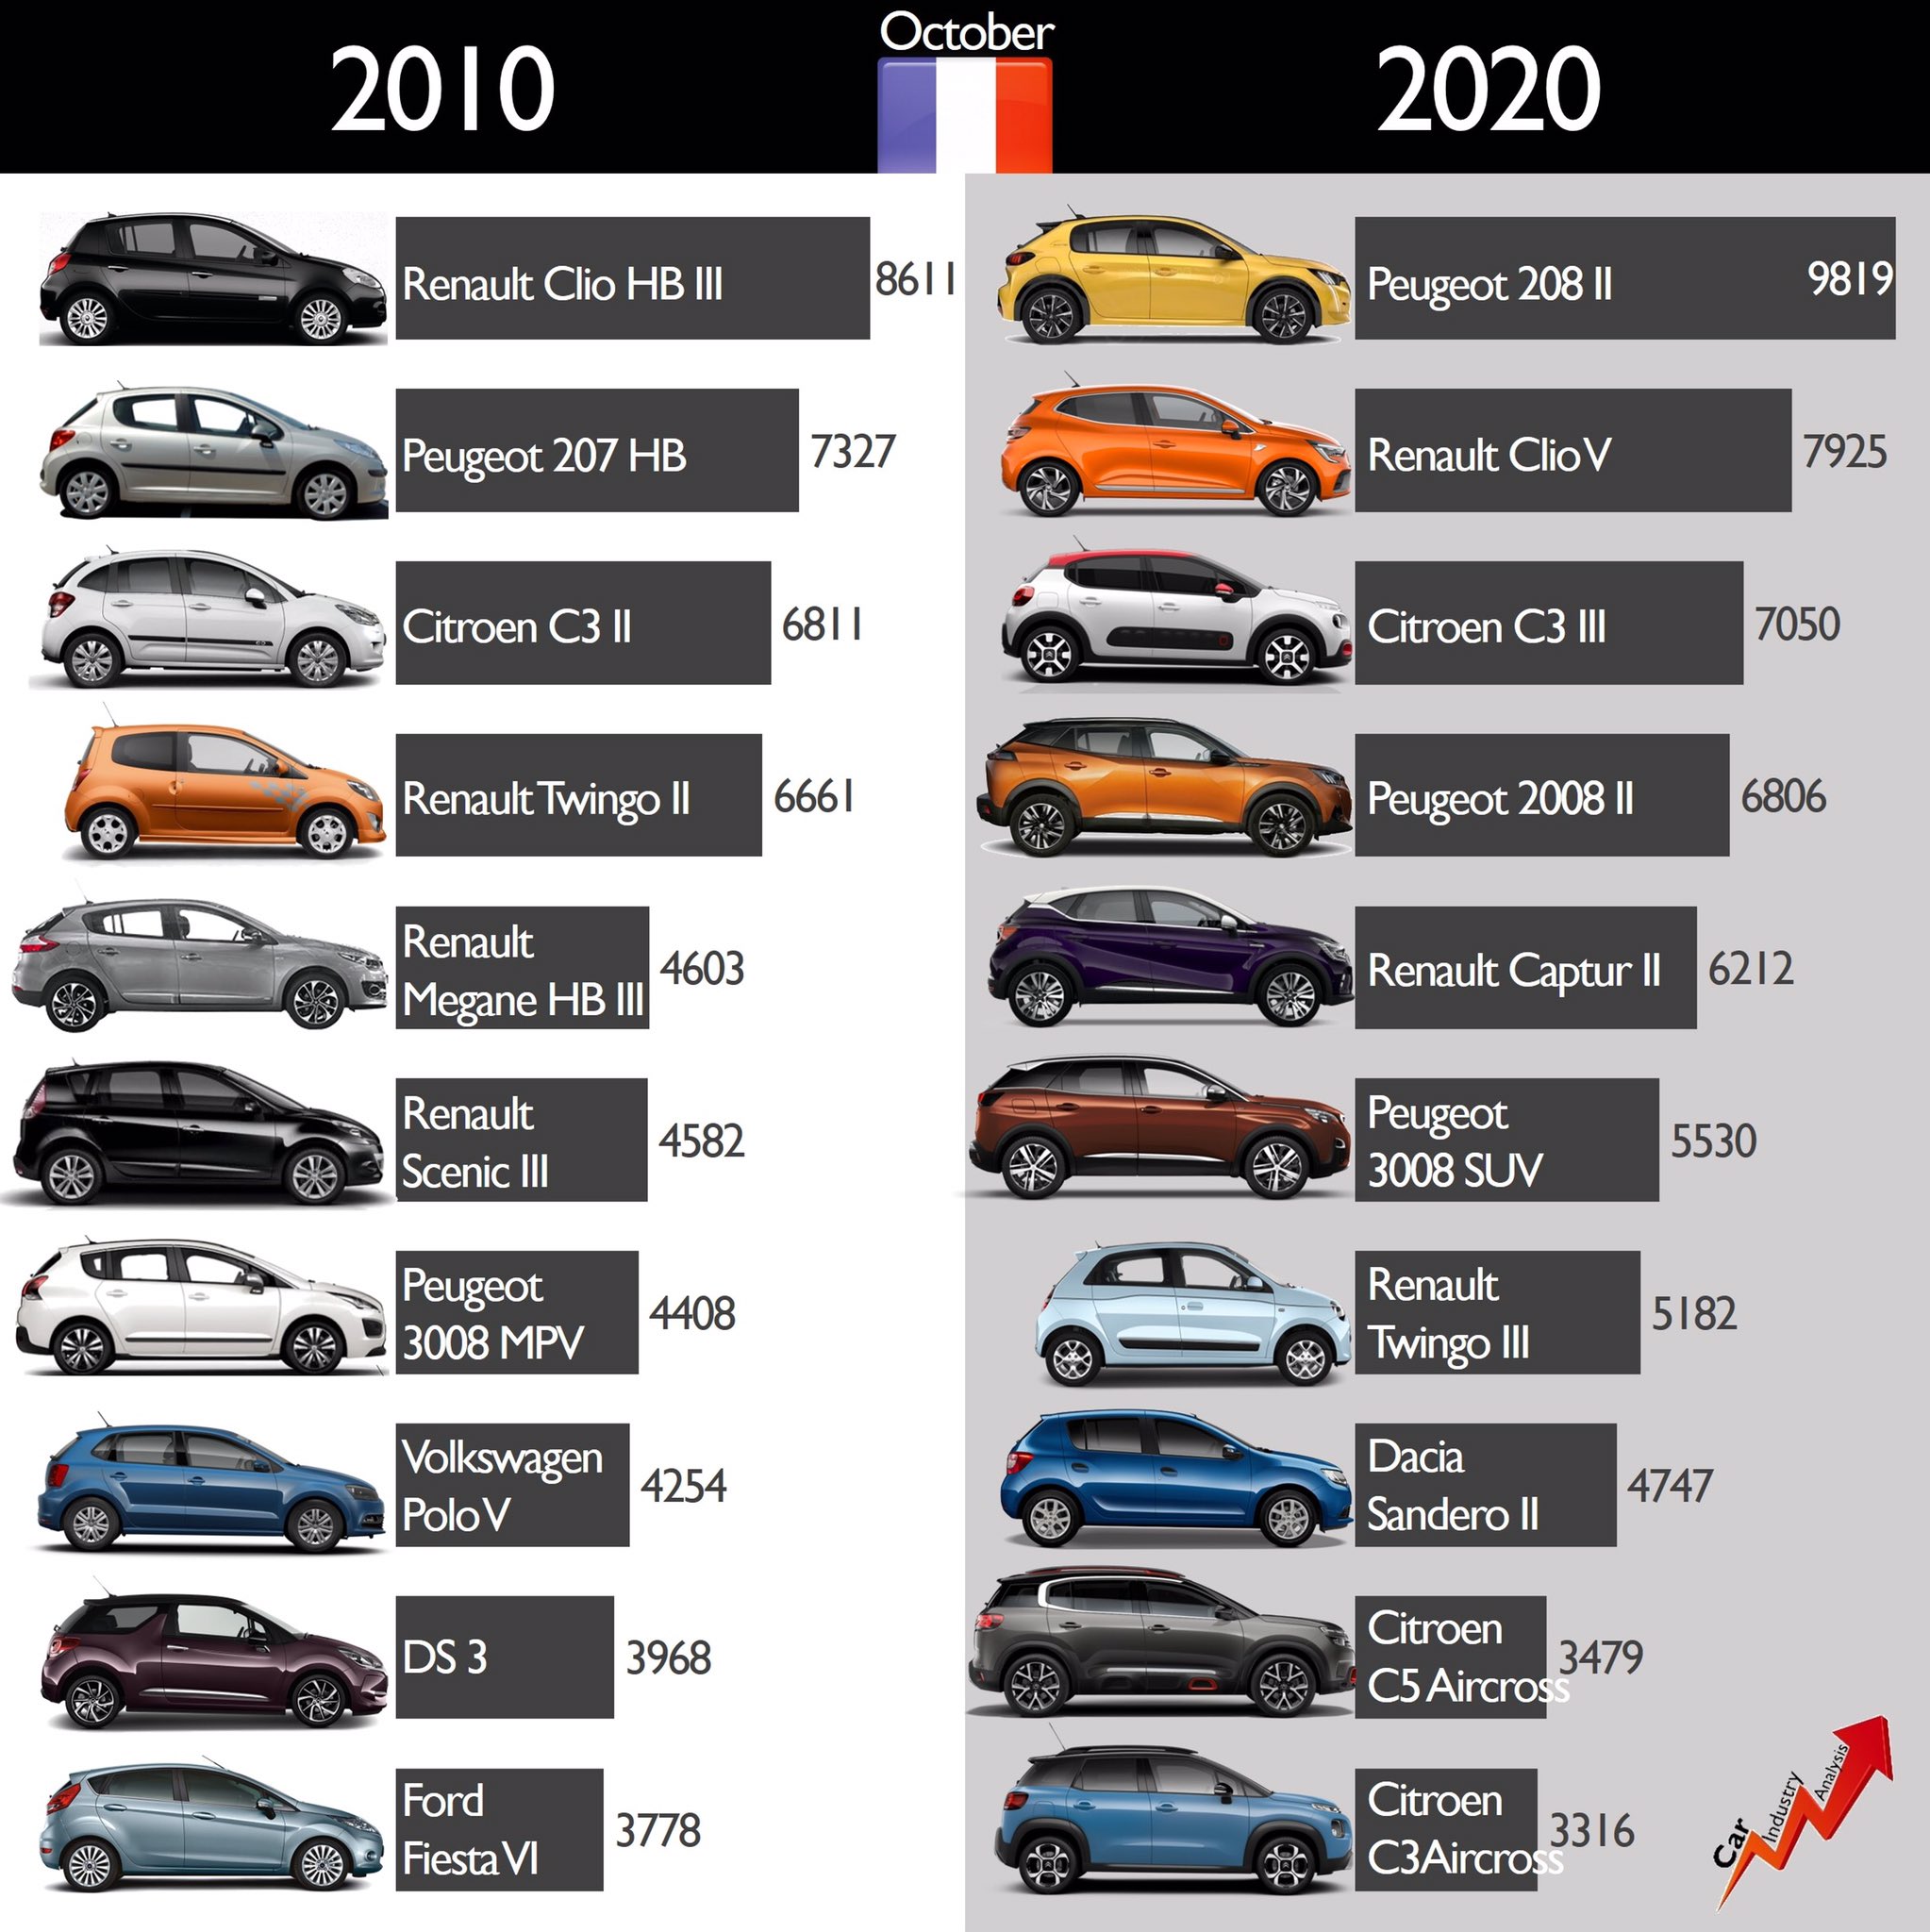 digital Brug af en computer glæde Car Industry Analysis on Twitter: "French top 10 in October 2010 and  October 2020. New #Peugeot208 keeps ahead of the new #RenaultClio, but the  biggest event is that SUVs took some subcompacts,